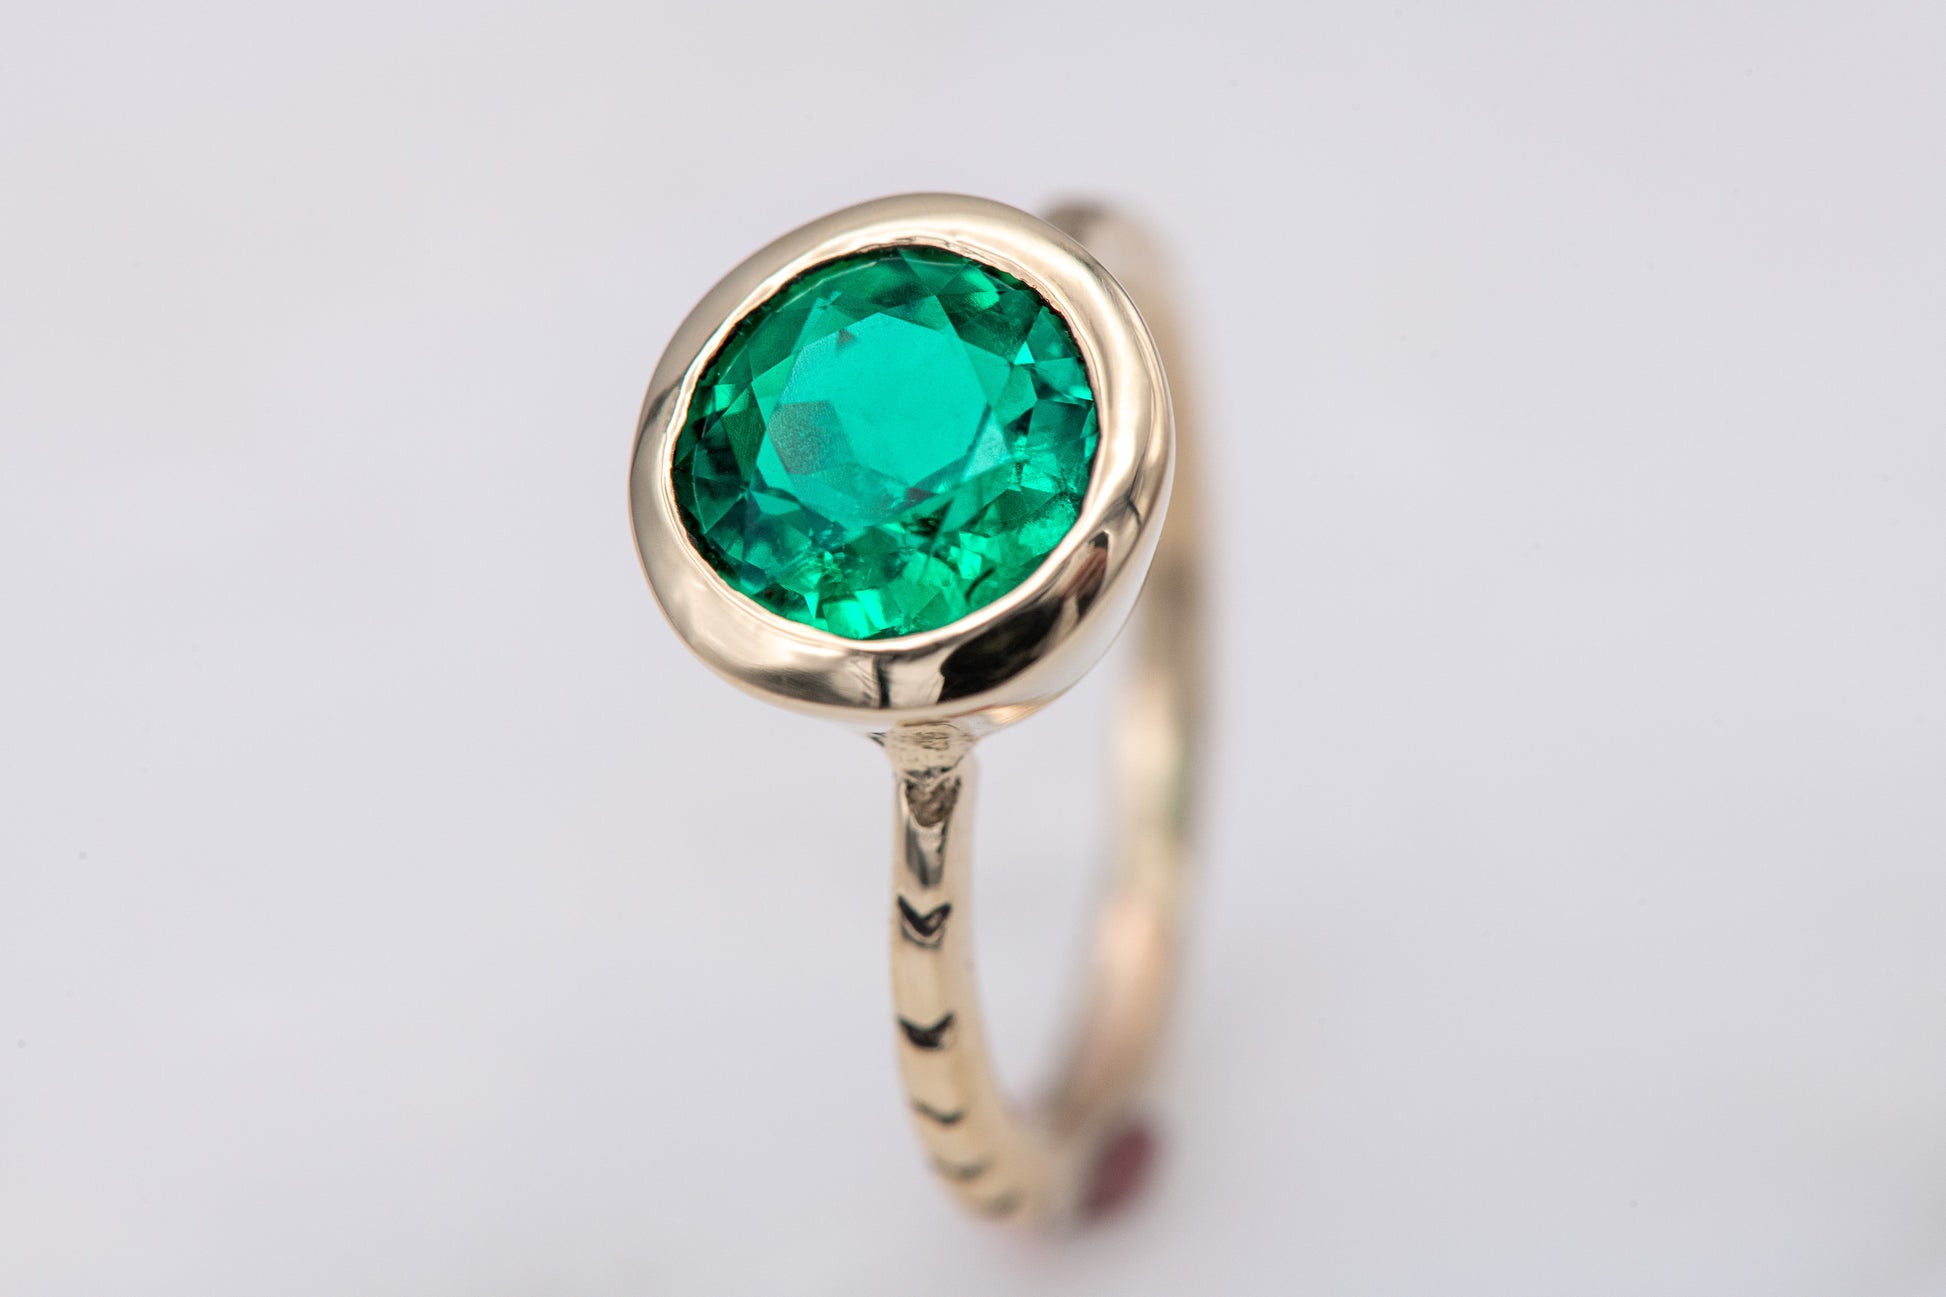 A handmade Emerald and Yellow Gold Engagement Ring by Cassin Jewelry.